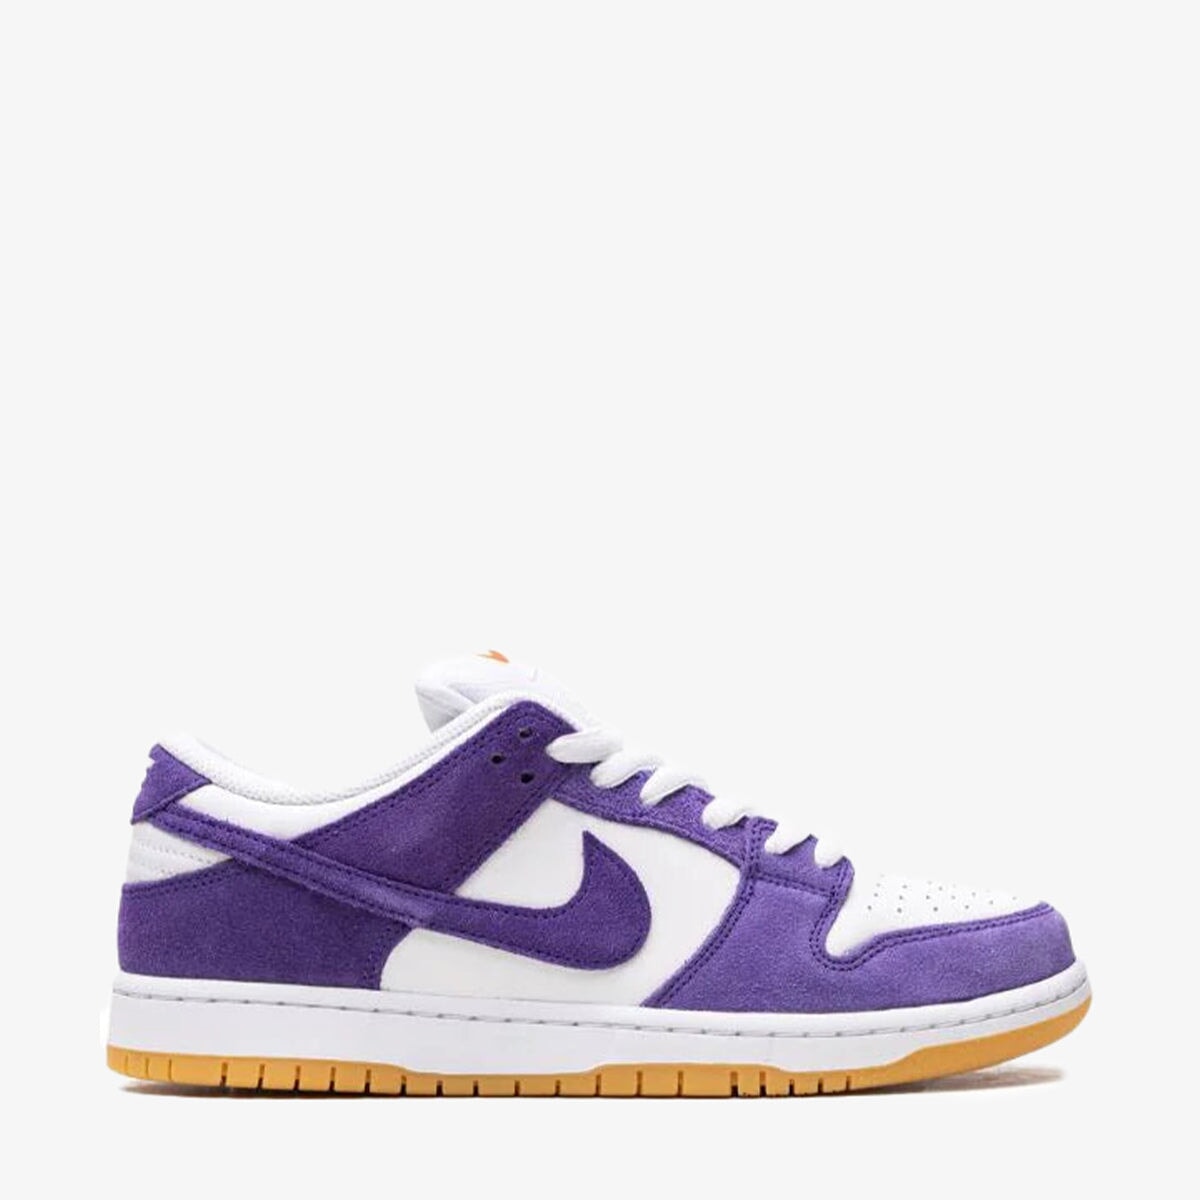 Nike Dunk Low SB Pro ISO "Court Purple" Plug and Play